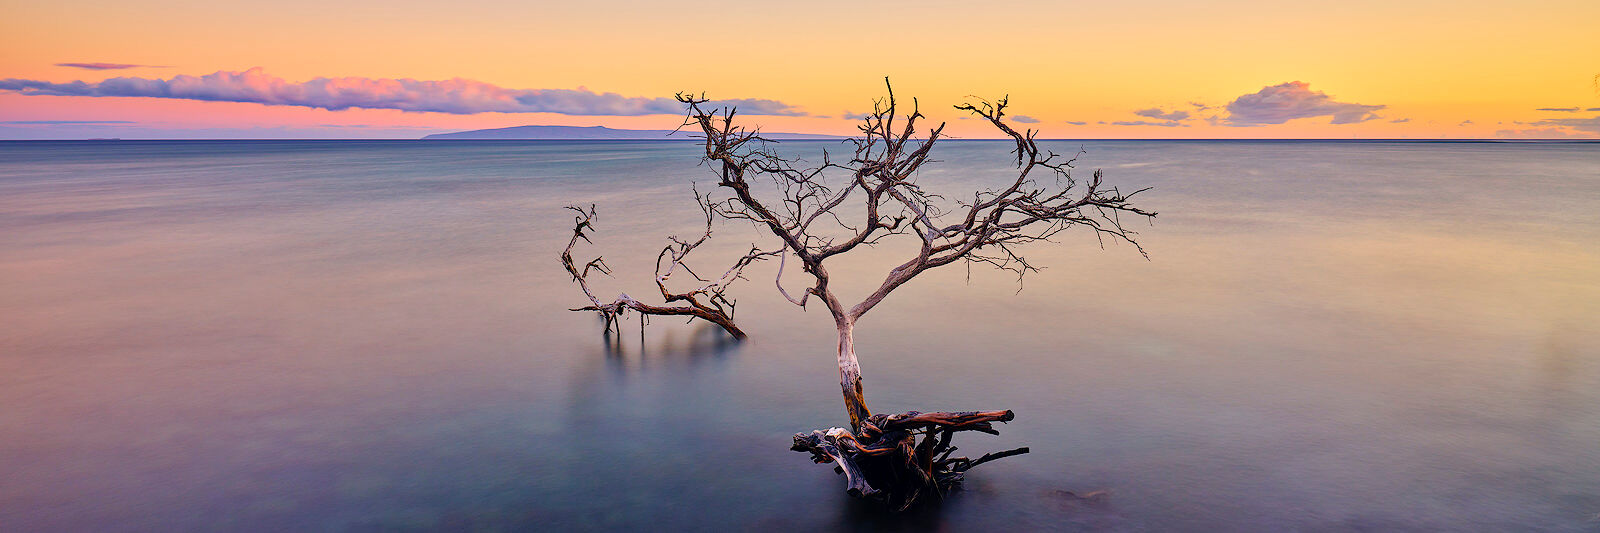 panoramic view a kiawe tree half submerged in the pacific near Olowalu on the island of Maui, Hawaii.  Fine art photograph by Andrew Shoemaker